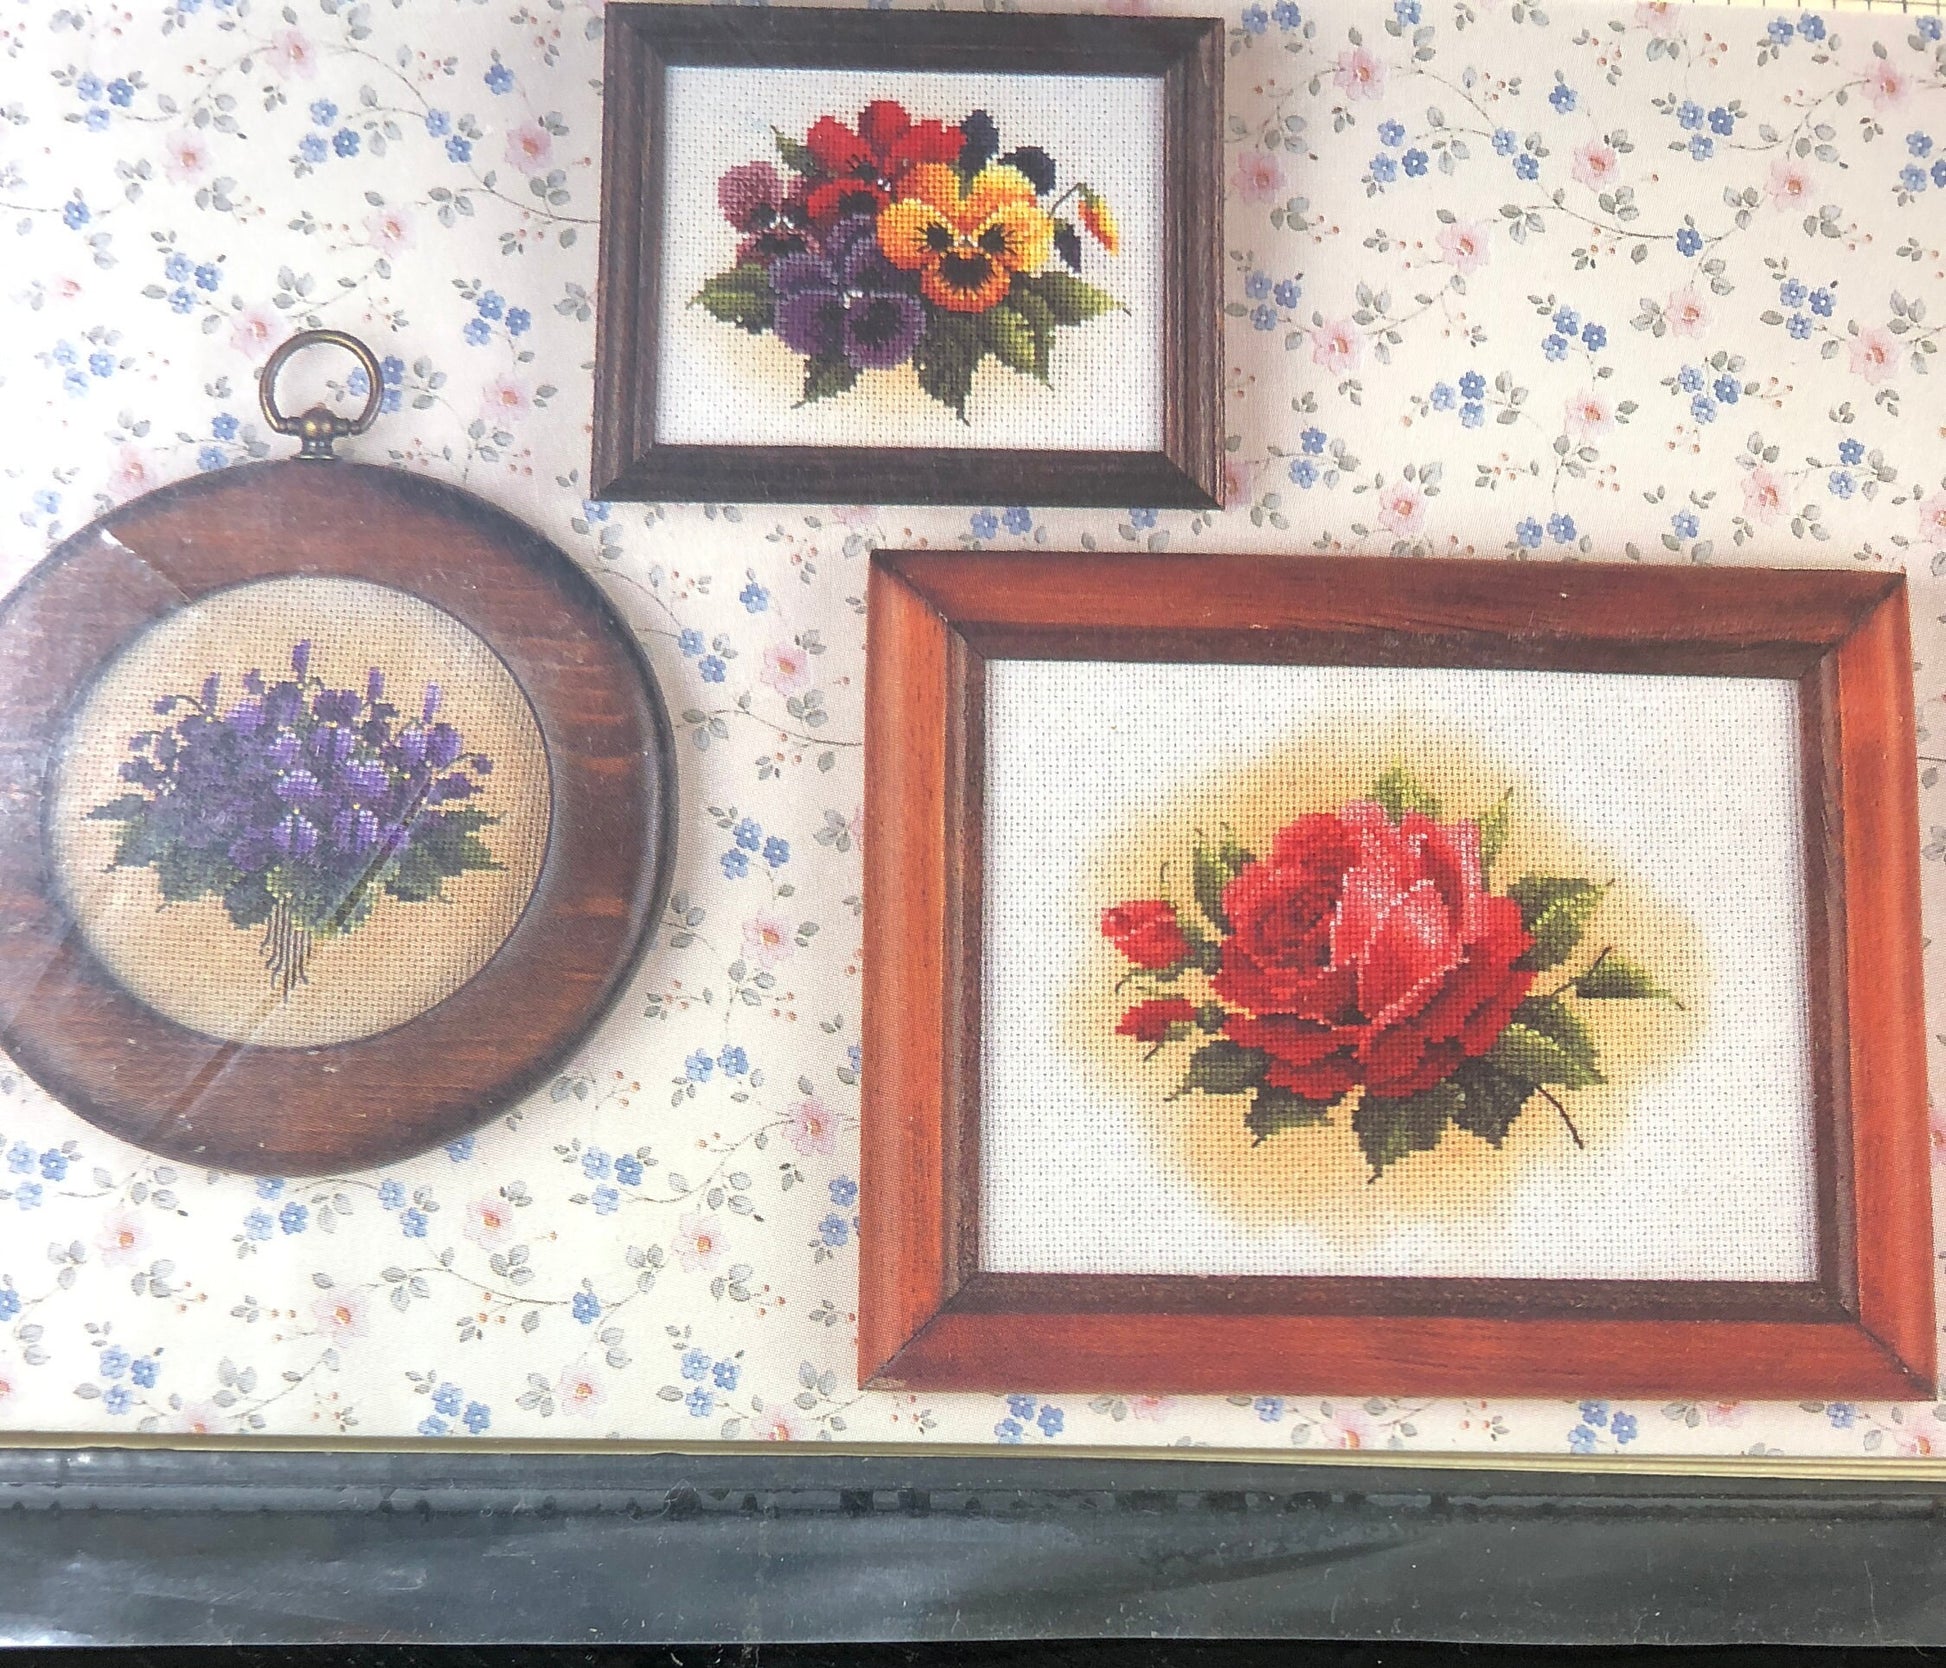 Lavender & Lace, Violets, Pansies, Roses, Vintage, Counted Cross Stitch Pattern